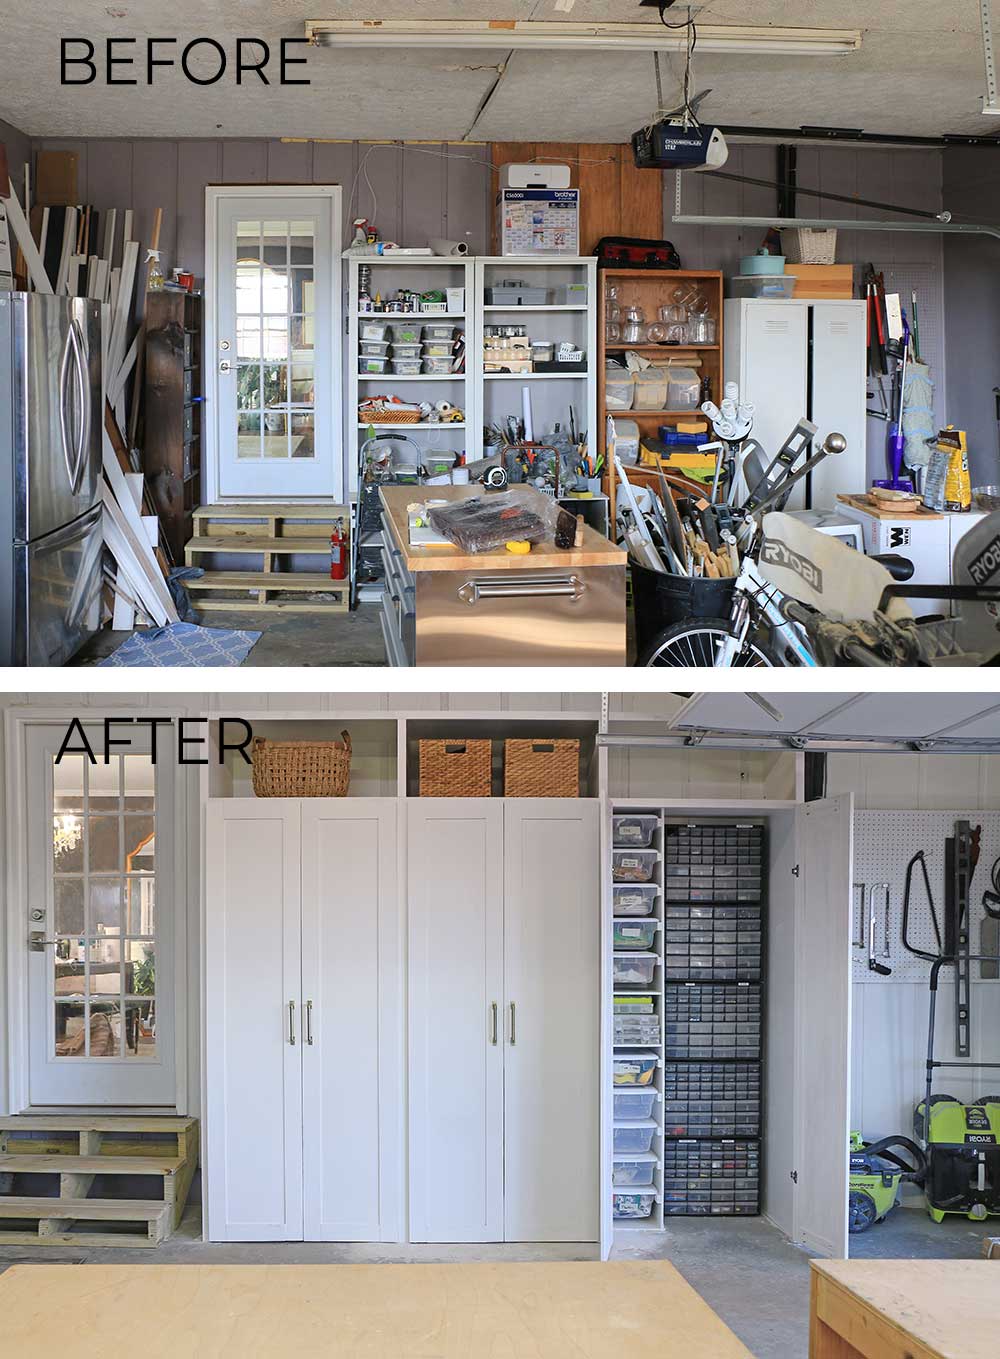 Messy garage before with hoarder tendencies and messes, and after with tidy organized space